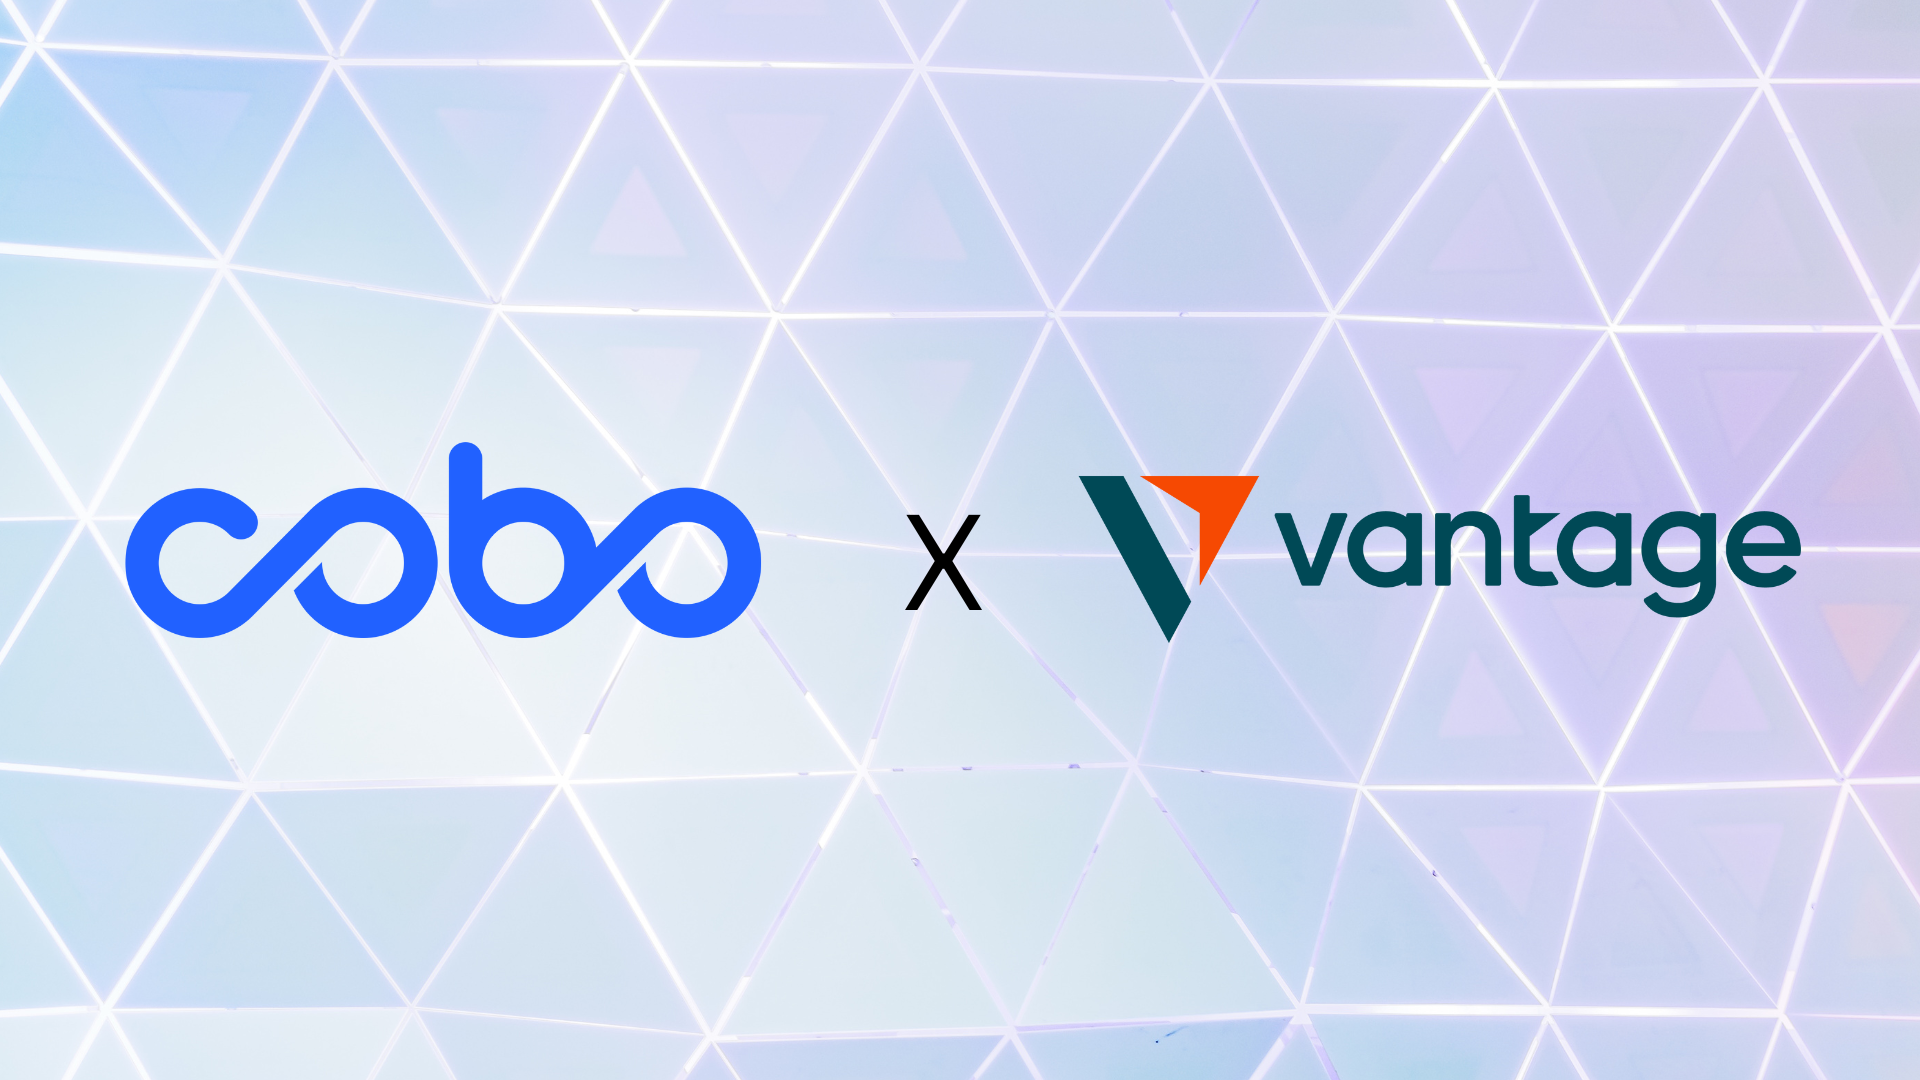 Leading Multi-Asset Broker, Vantage Markets, Moves to Accept Stablecoin Payments, Enabled by Global Custody Technology Provider, Cobo